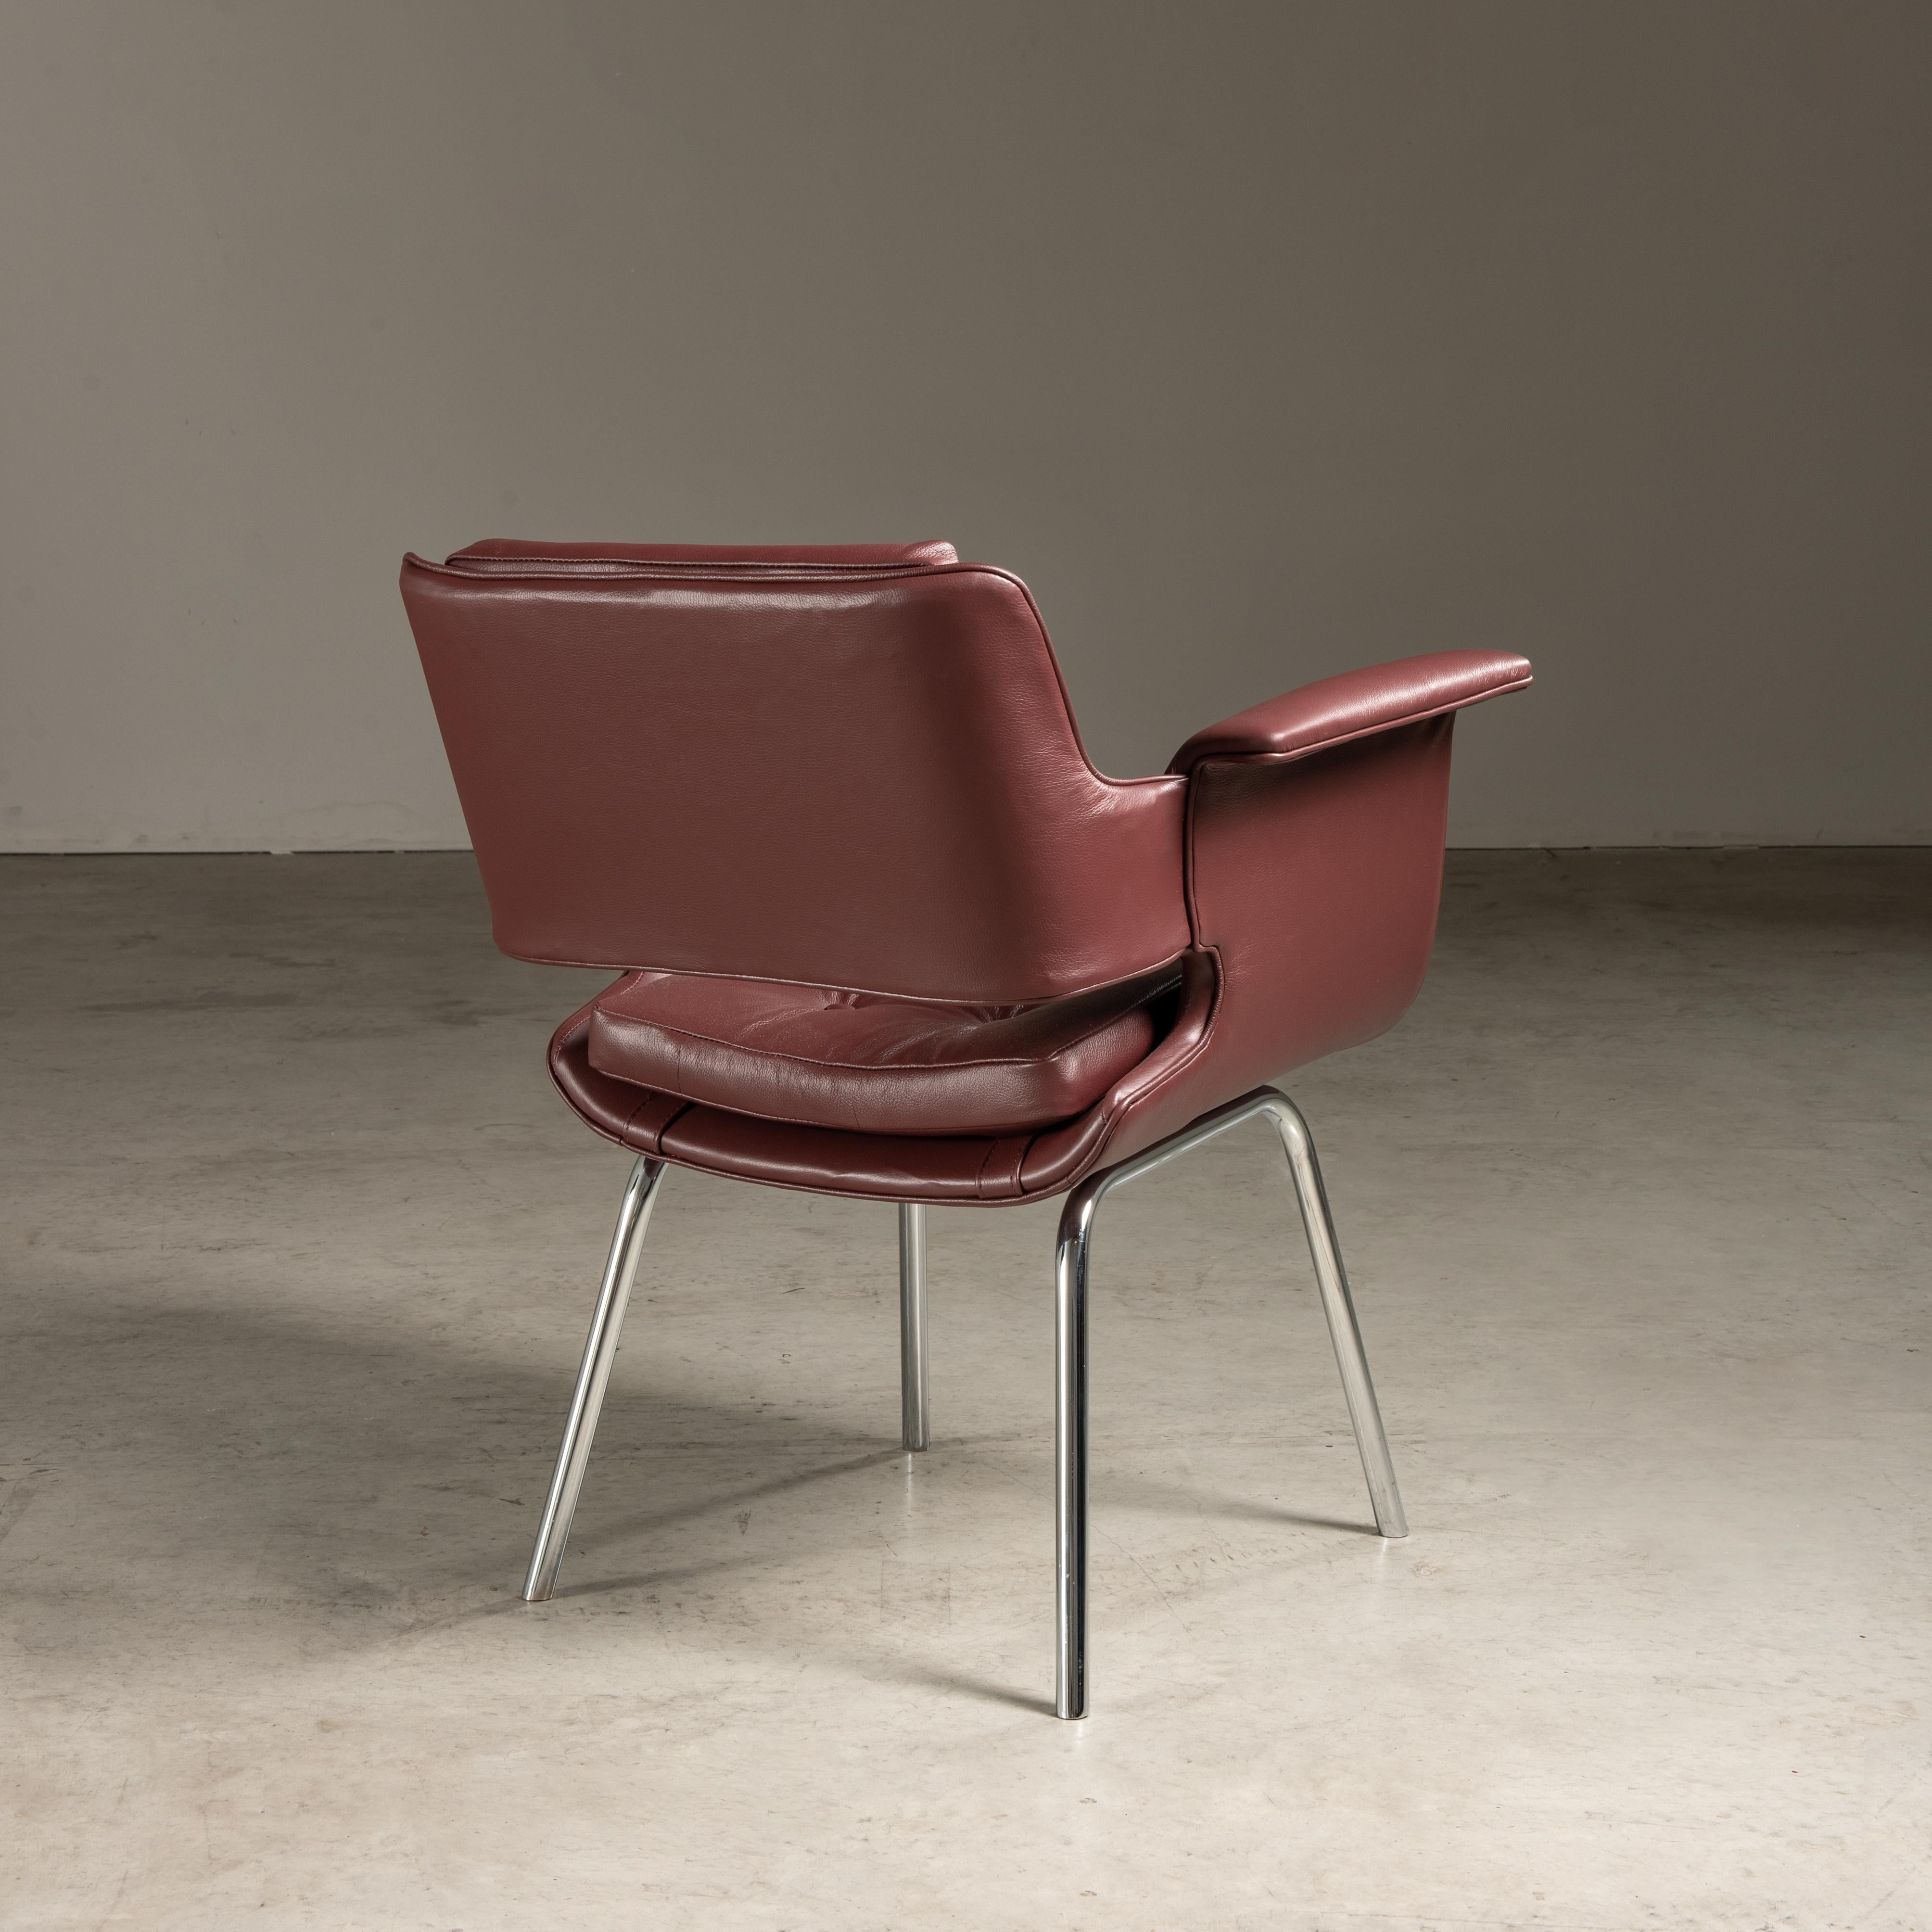 Office Chair in Wood, Steel and Leather, Carlo Fongaro, Brazilian Mid-Century For Sale 1